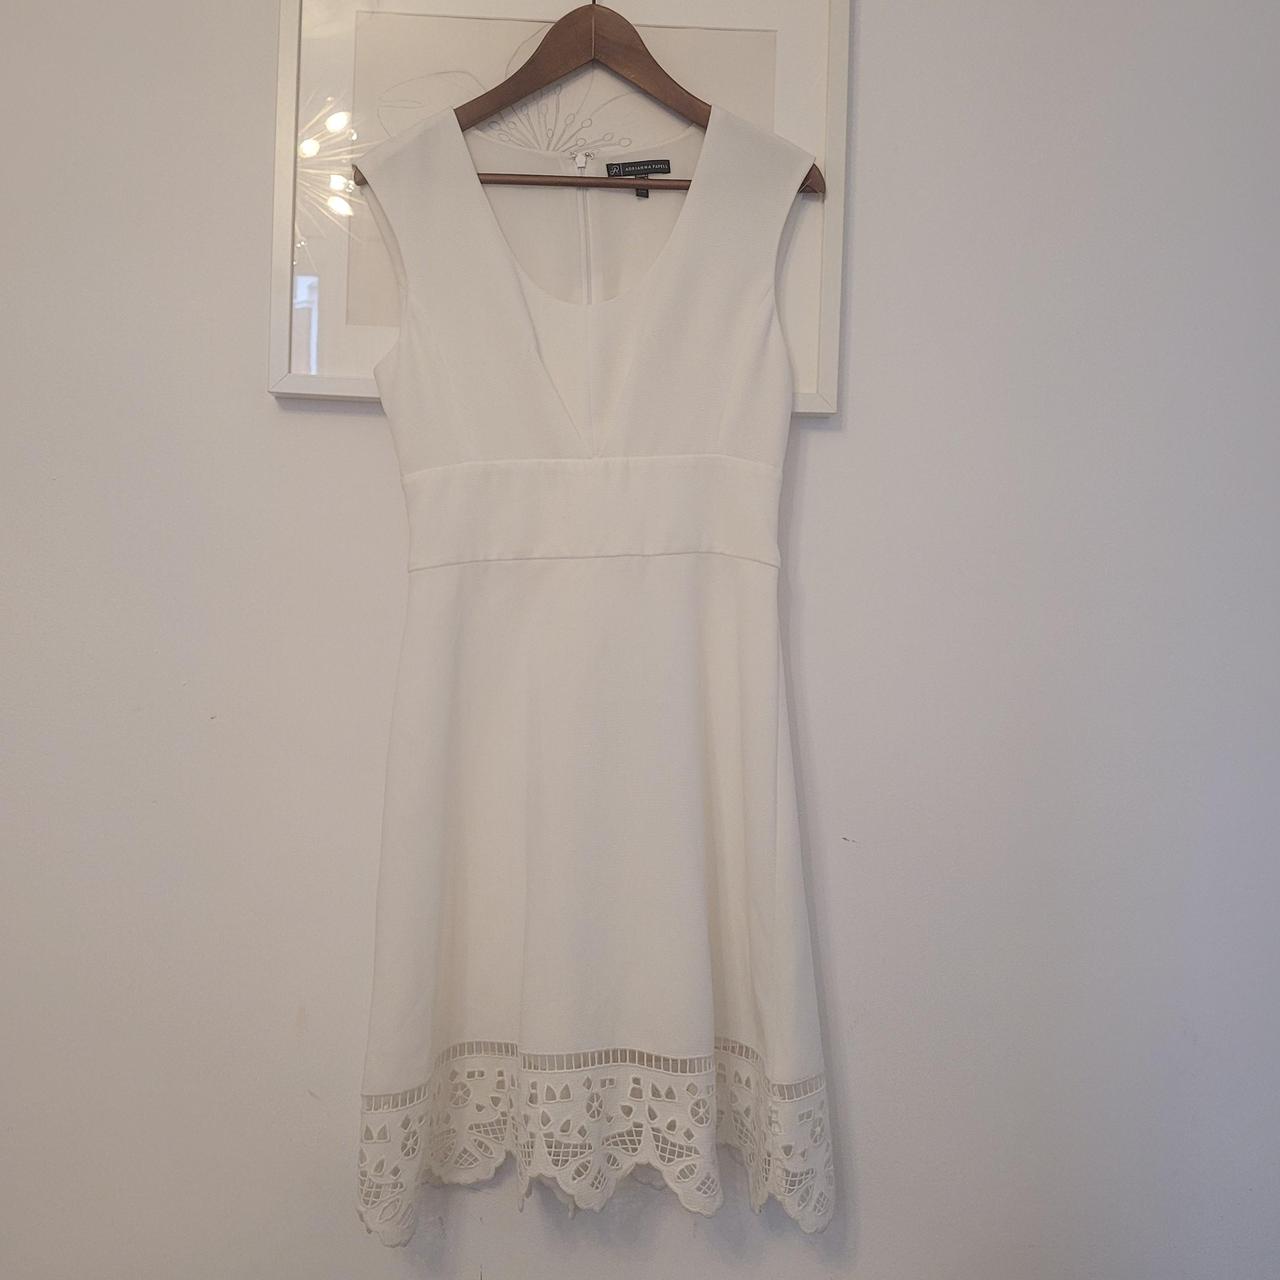 Stunning Adrianna Papell white dress with a lace... - Depop